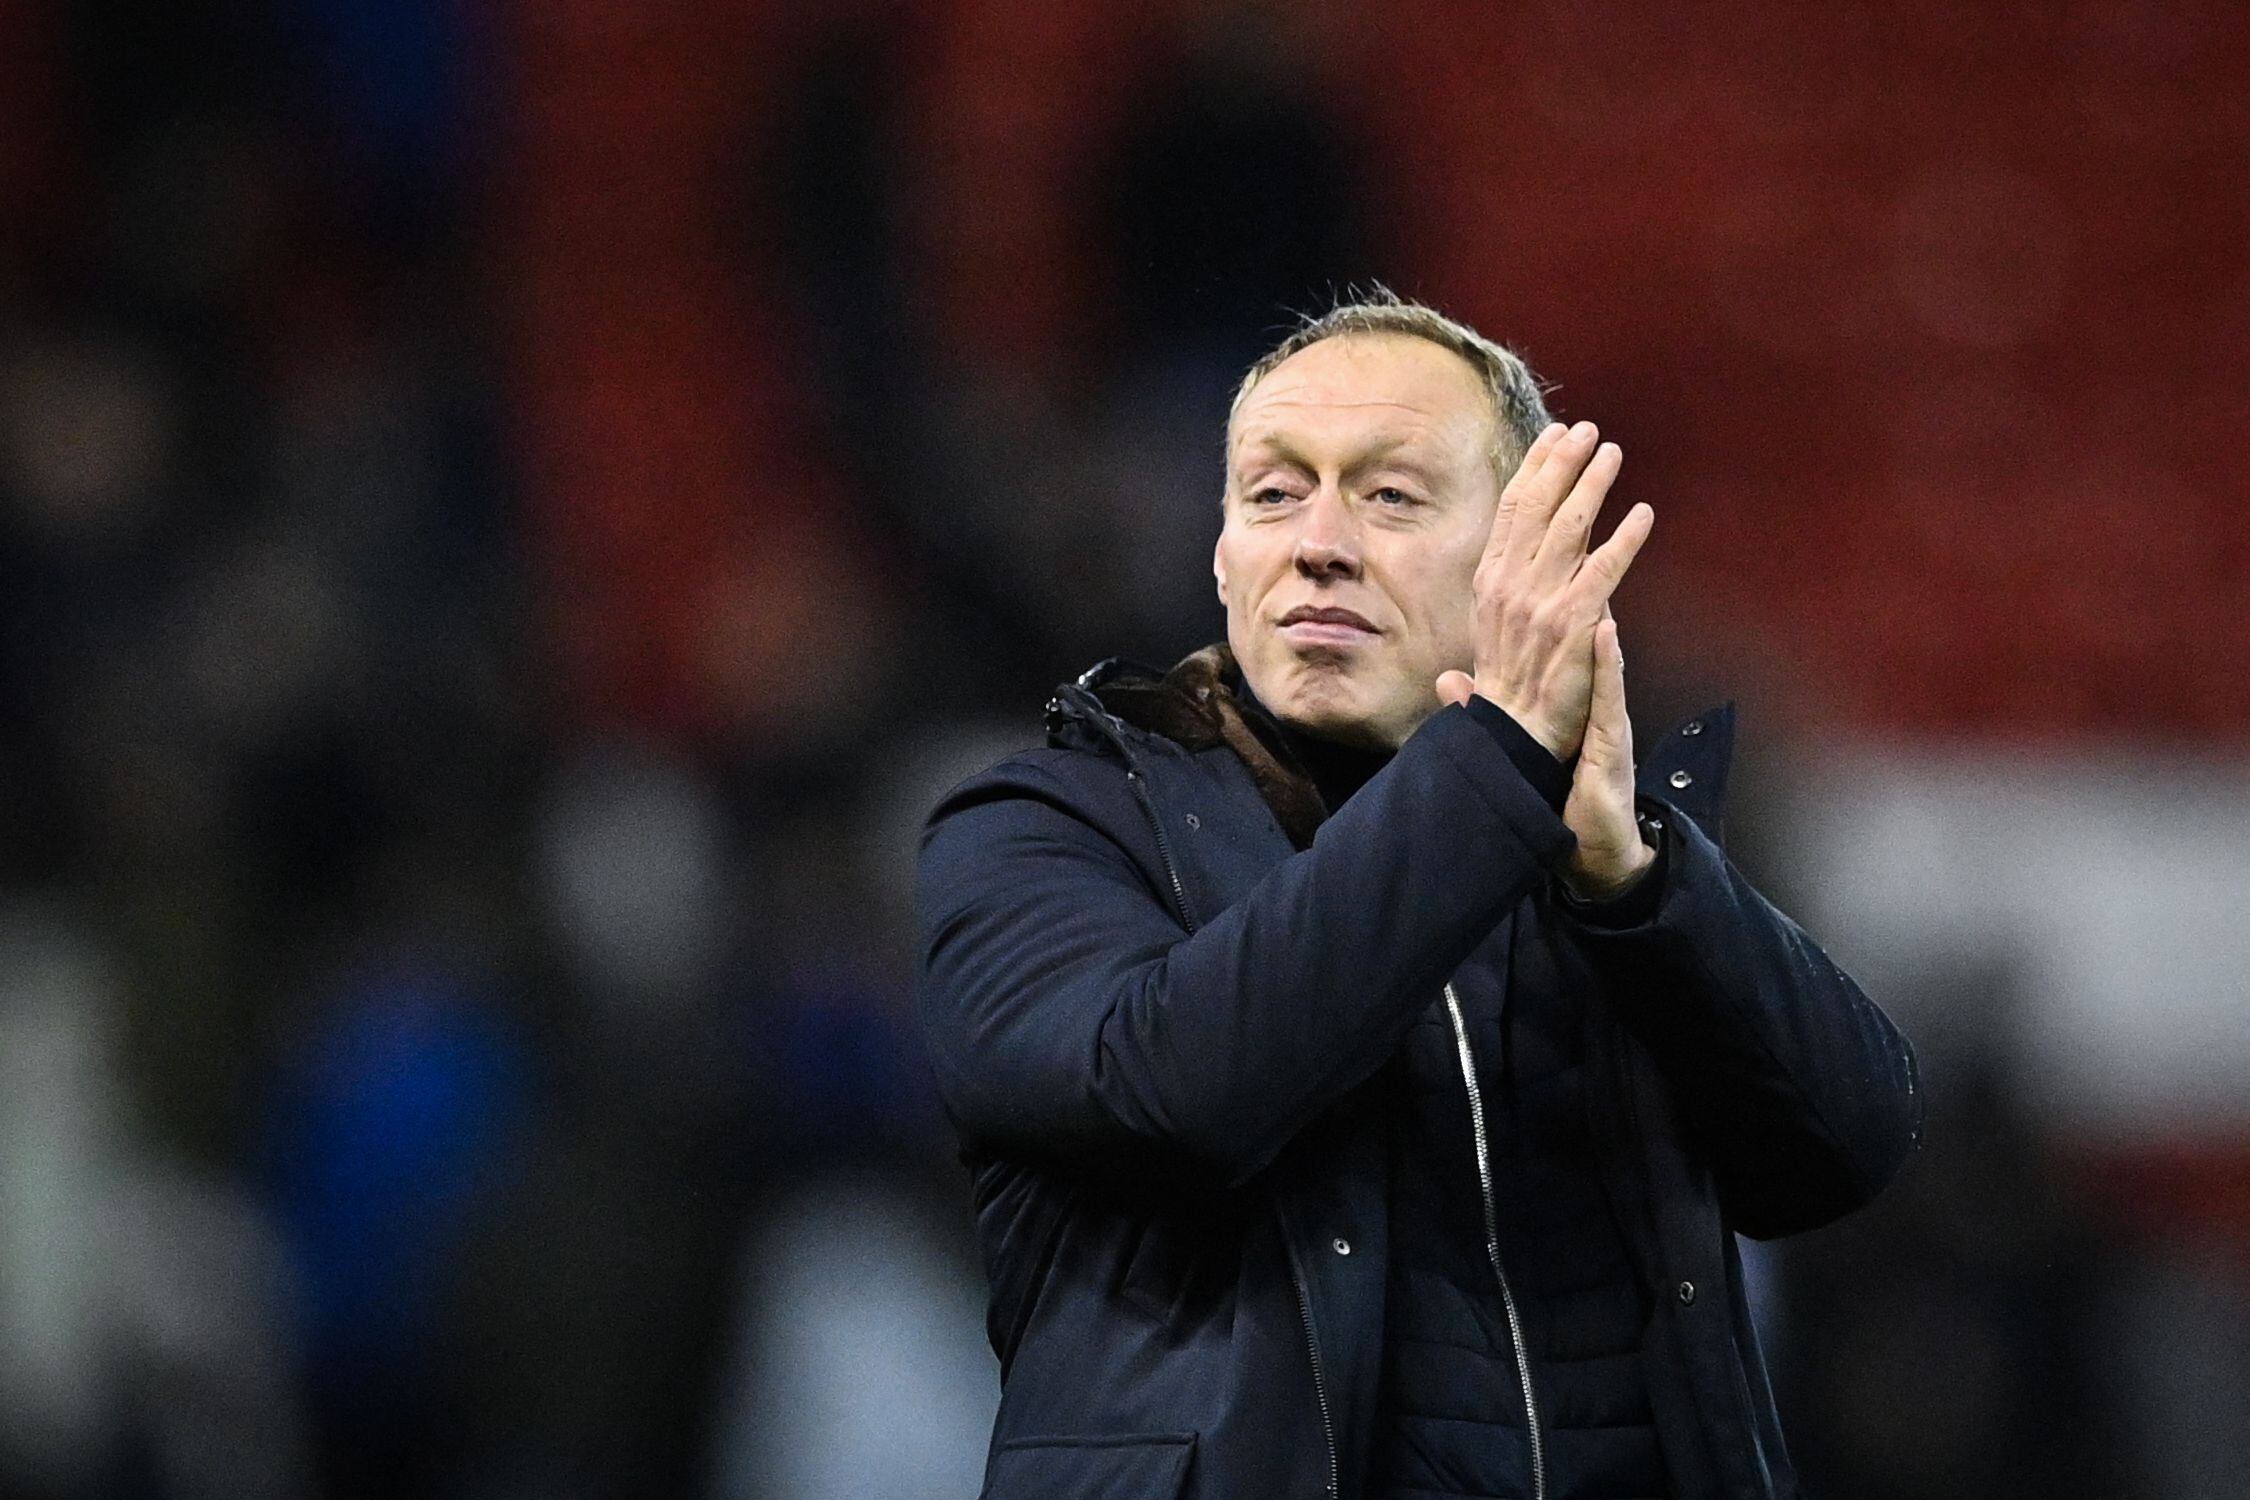 Nottingham Forest's Welsh manager Steve Cooper applauds the supporters after the English FA Cup fourth round football match between Nottingham Forest and Leicester City at The City Ground in Nottingham, central England, on February 6, 2022. - Nottingham Forest won the game 4-1. (Photo by JUSTIN TALLIS / AFP) / RESTRICTED TO EDITORIAL USE. No use with unauthorized audio, video, data, fixture lists, club/league logos or 'live' services. Online in-match use limited to 120 images. An additional 40 images may be used in extra time. No video emulation. Social media in-match use limited to 120 images. An additional 40 images may be used in extra time. No use in betting publications, games or single club/league/player publications. / 